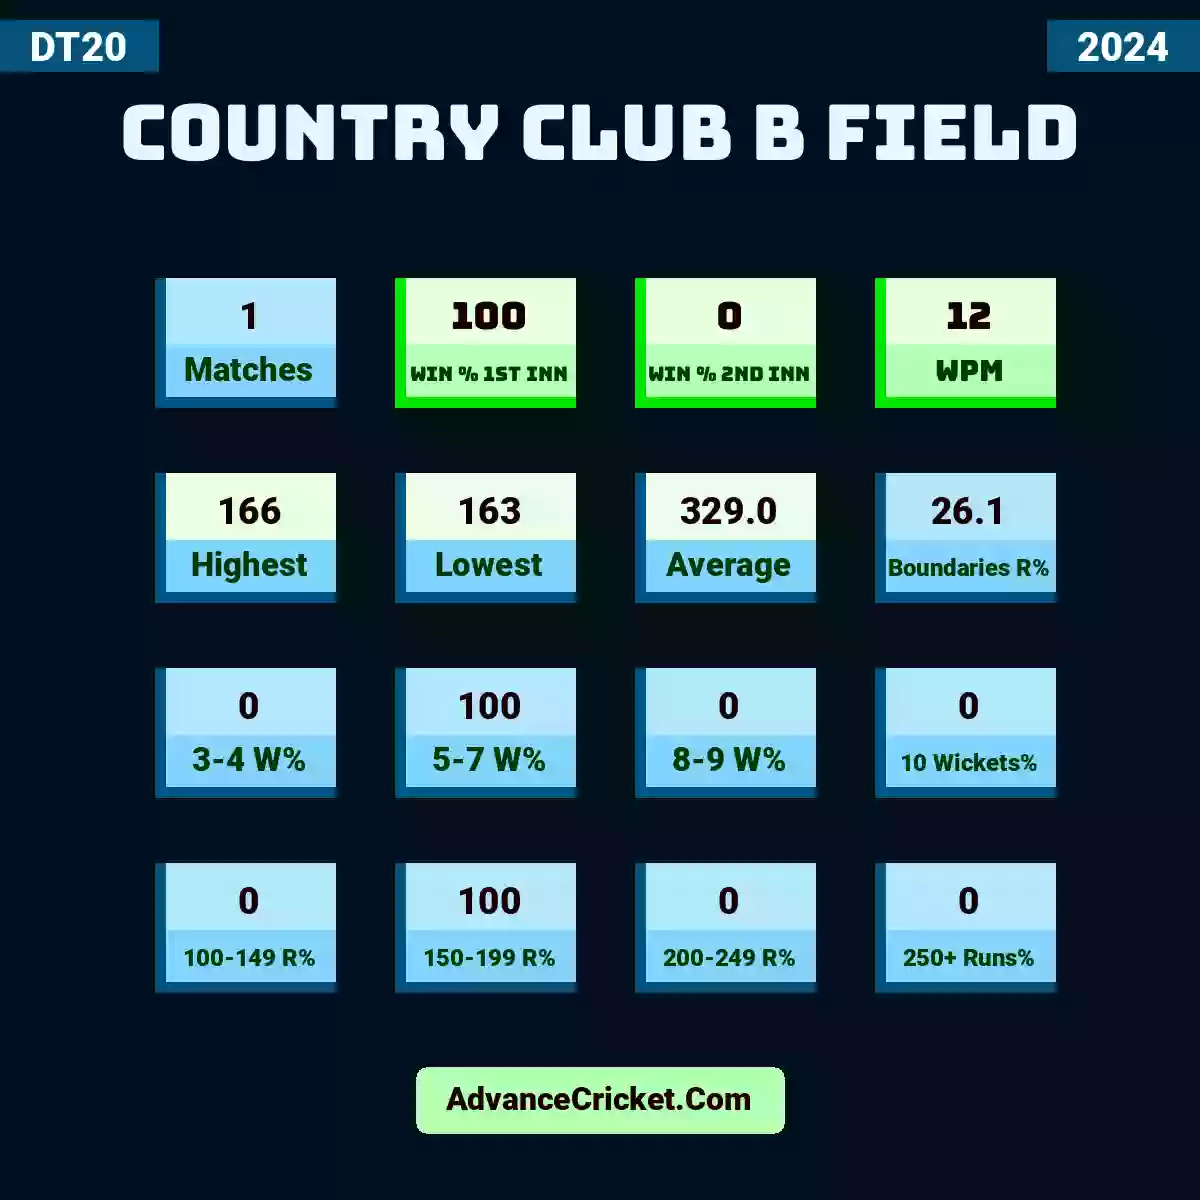 Image showing Country Club B Field with Matches: 1, Win % 1st Inn: 100, Win % 2nd Inn: 0, WPM: 12, Highest: 166, Lowest: 163, Average: 329.0, Boundaries R%: 26.1, 3-4 W%: 0, 5-7 W%: 100, 8-9 W%: 0, 10 Wickets%: 0, 100-149 R%: 0, 150-199 R%: 100, 200-249 R%: 0, 250+ Runs%: 0.